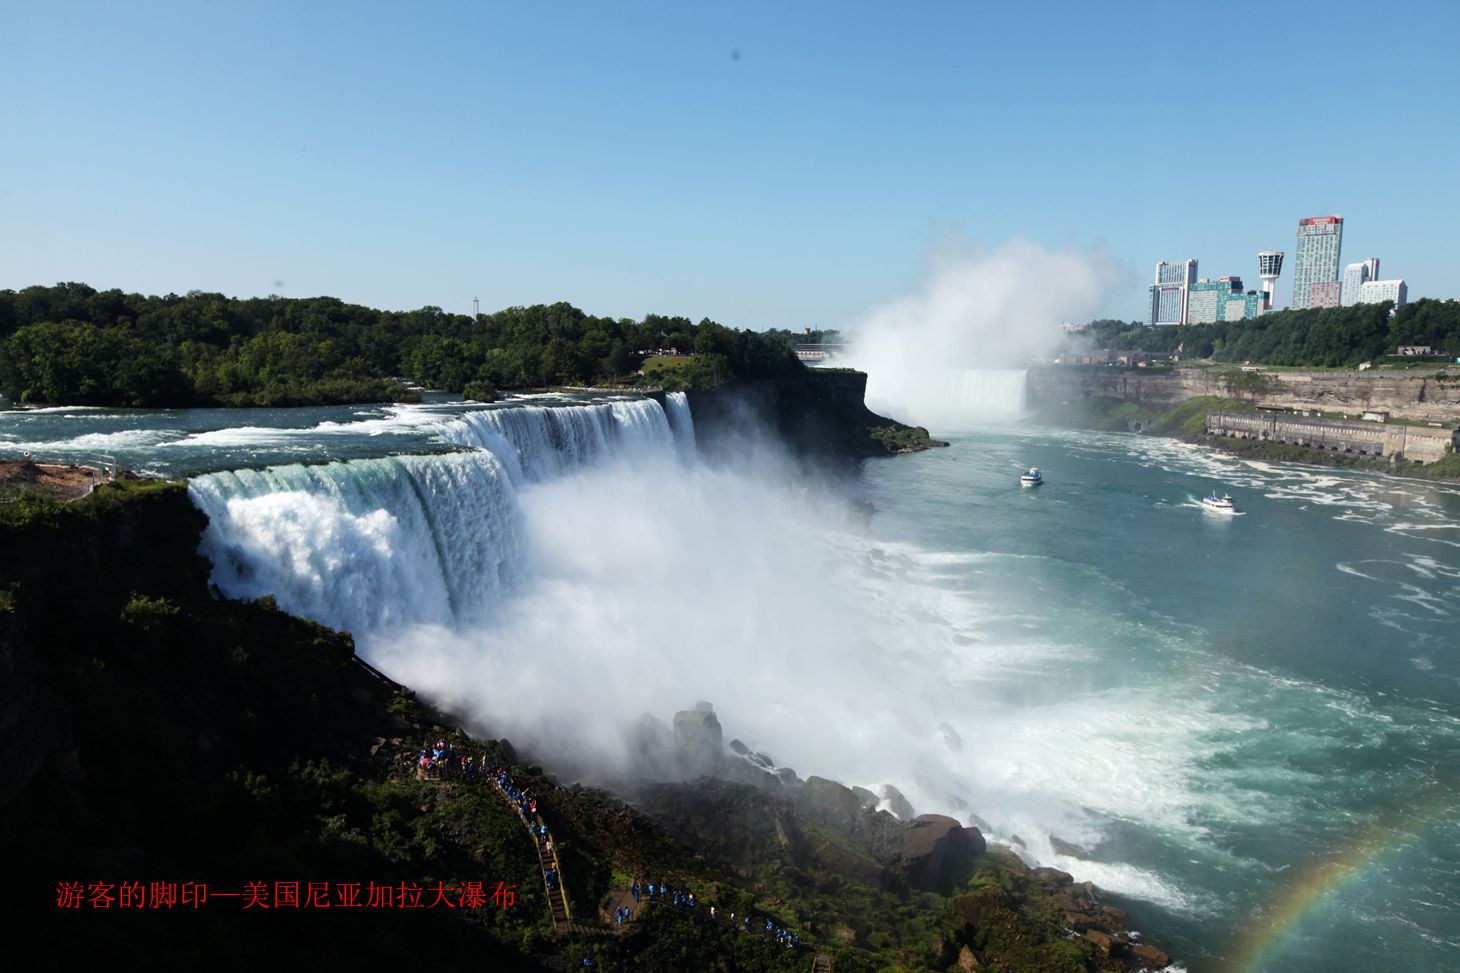 Niagara Falls, New York is the Ultimate Destination for World Explorers